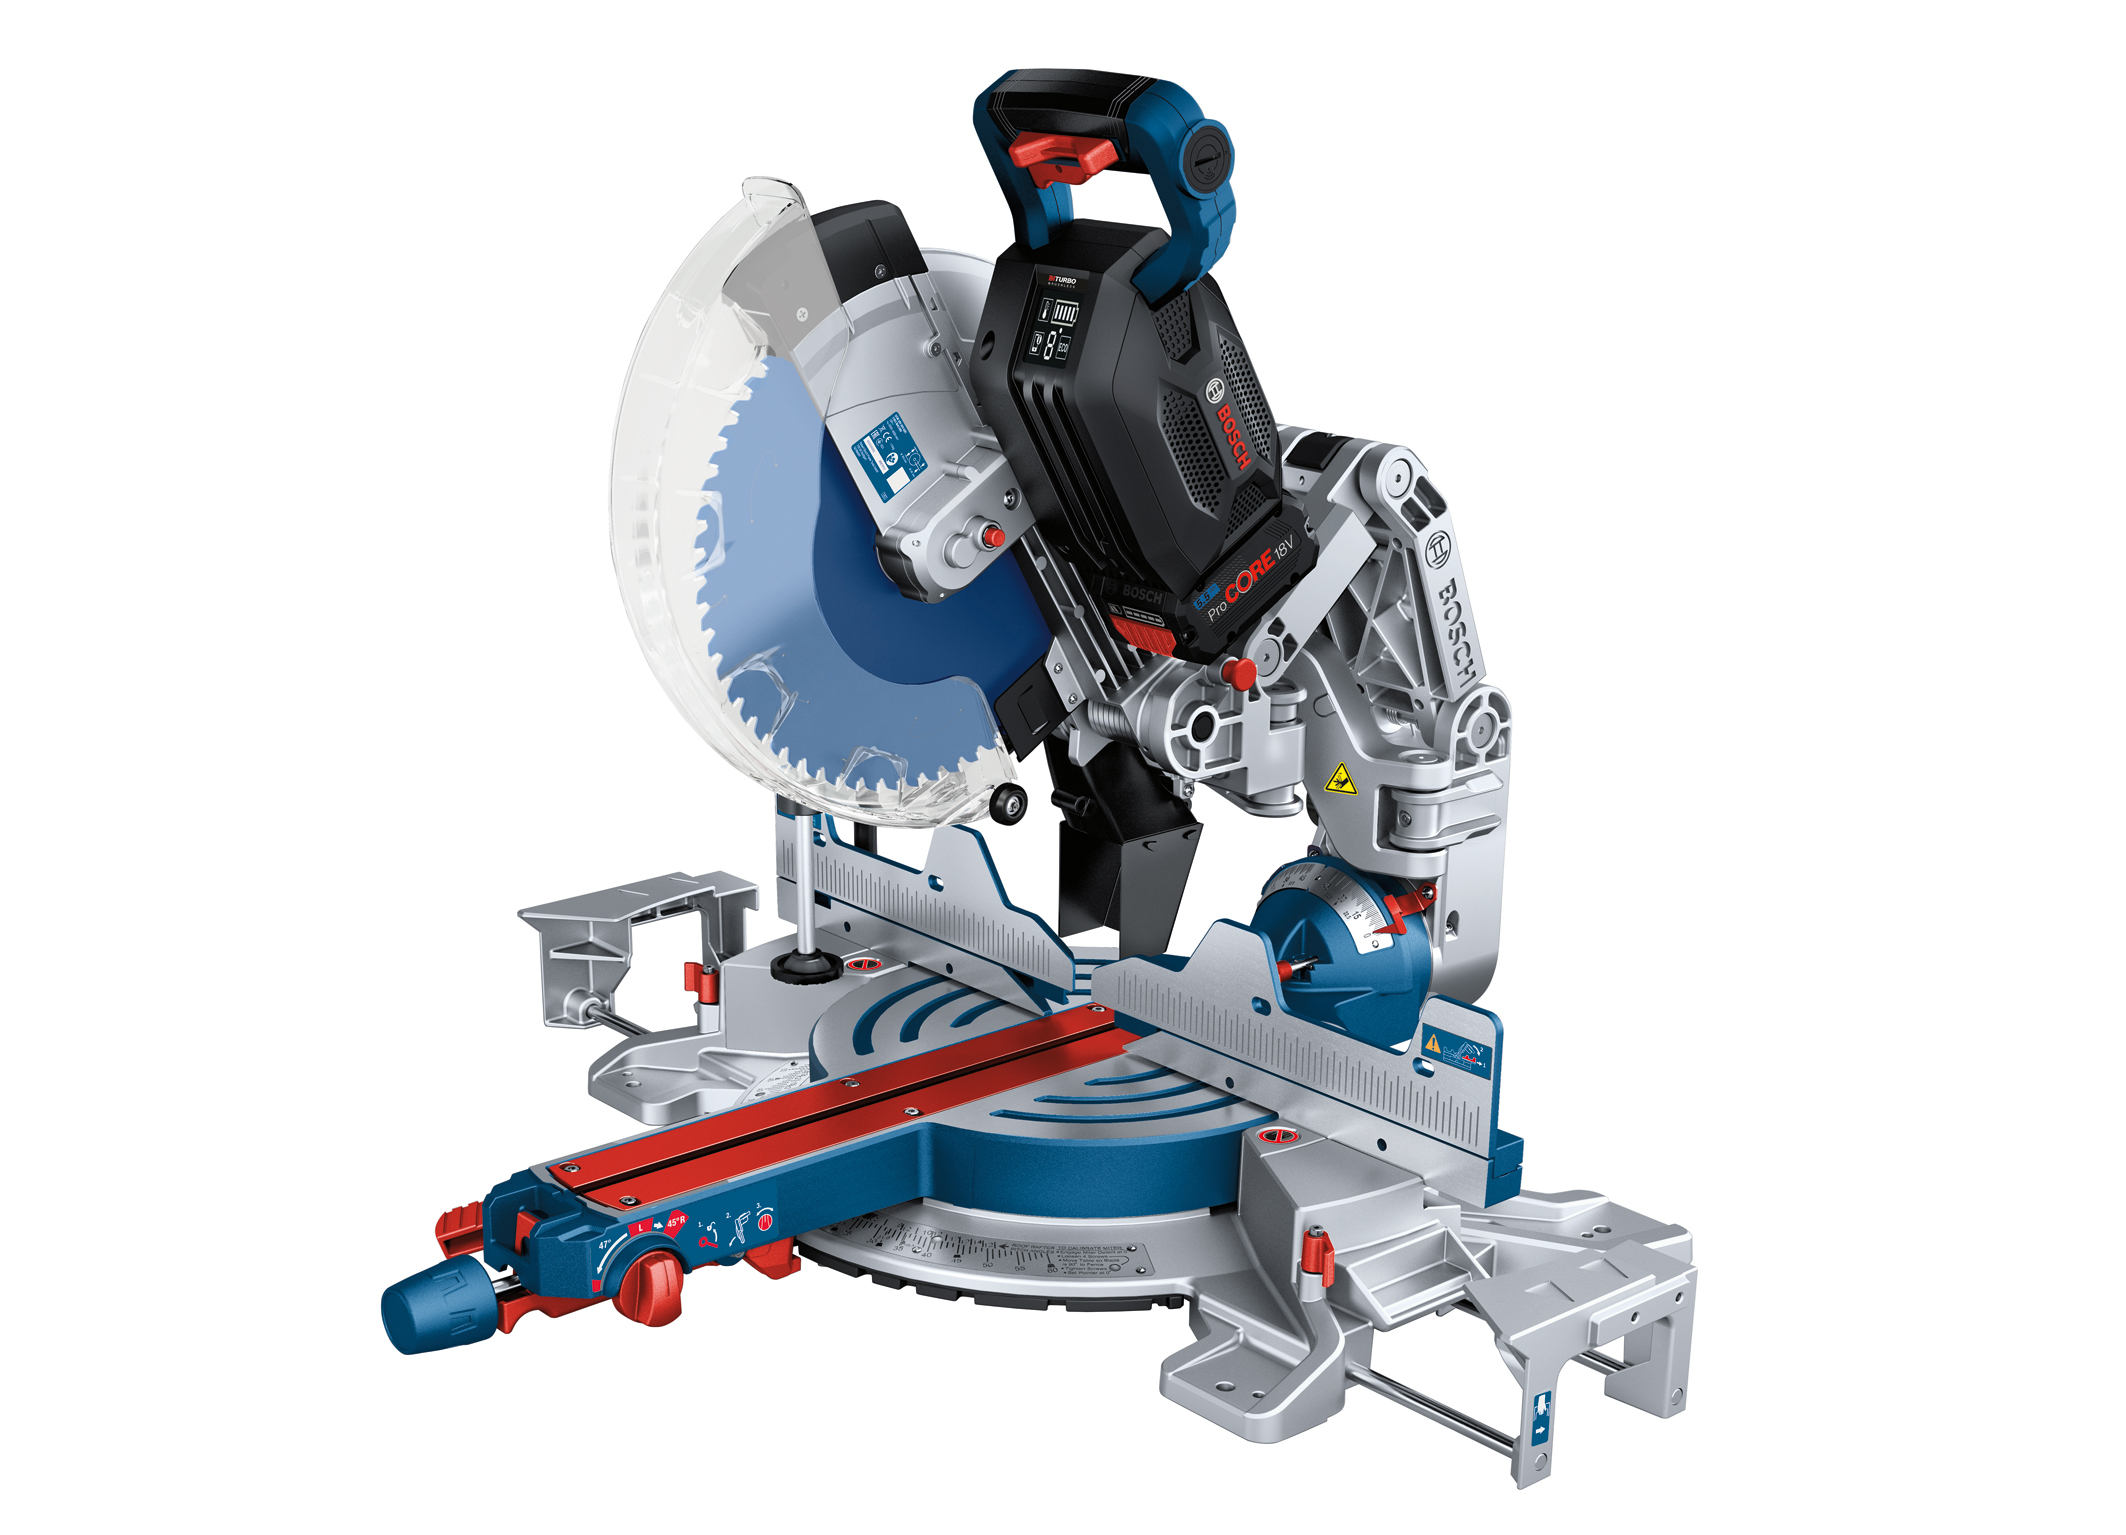 A new dimension of performance: Biturbo miter saw from Bosch for professionals